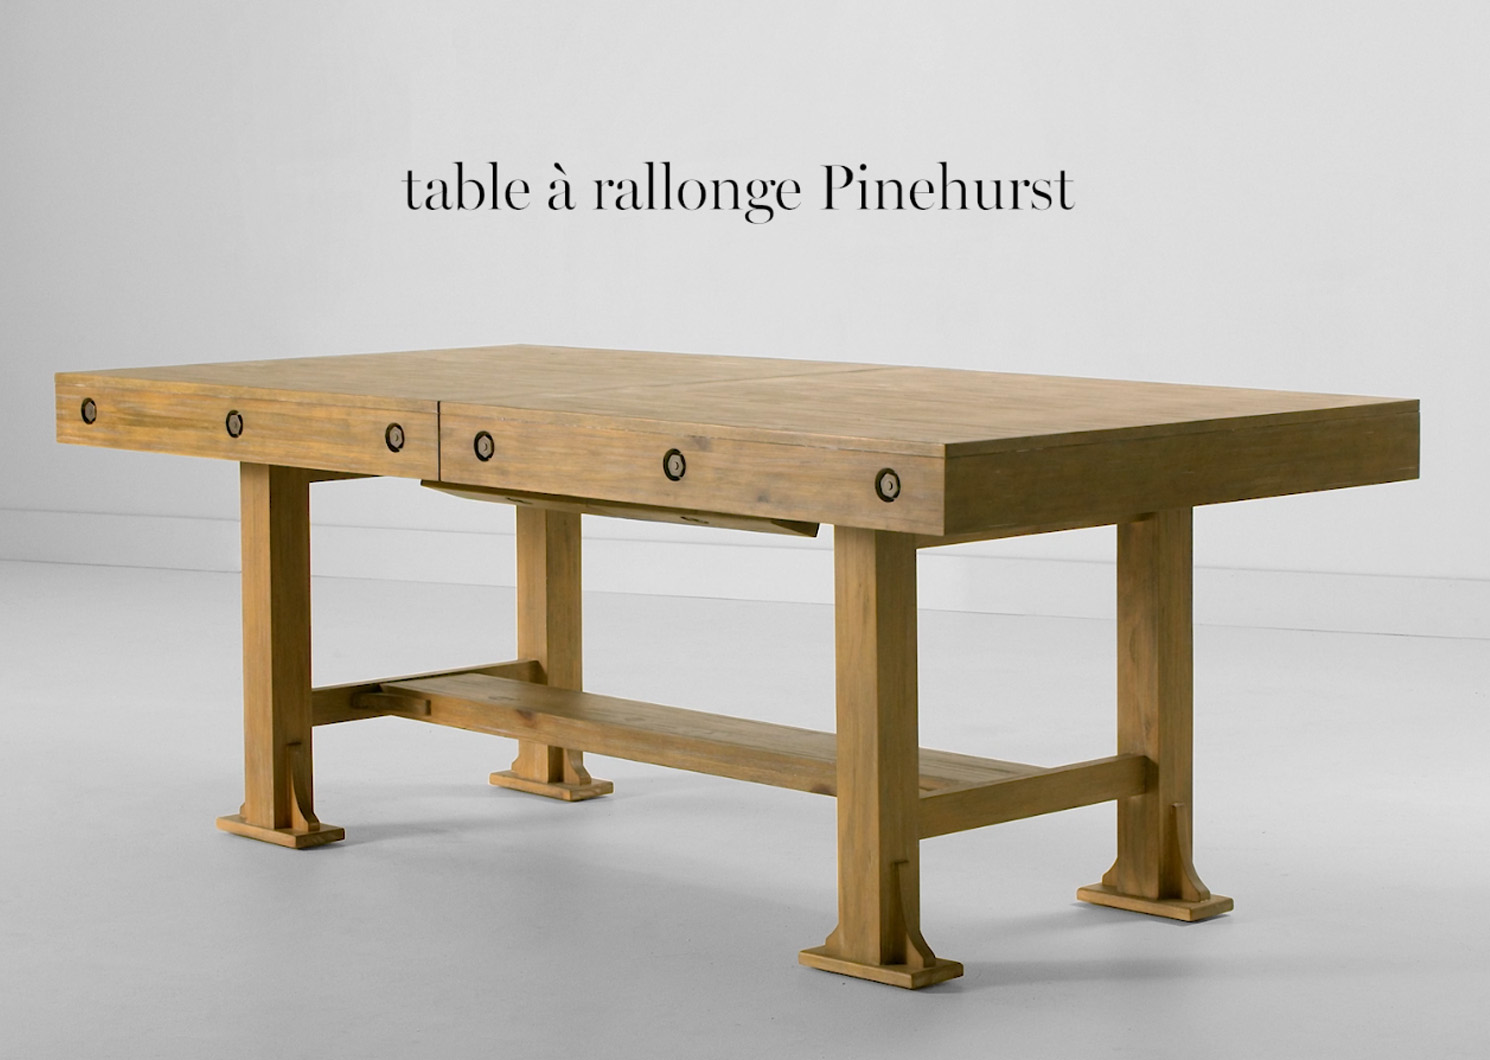 Table rall.rect. Pinehurst -Claire charb